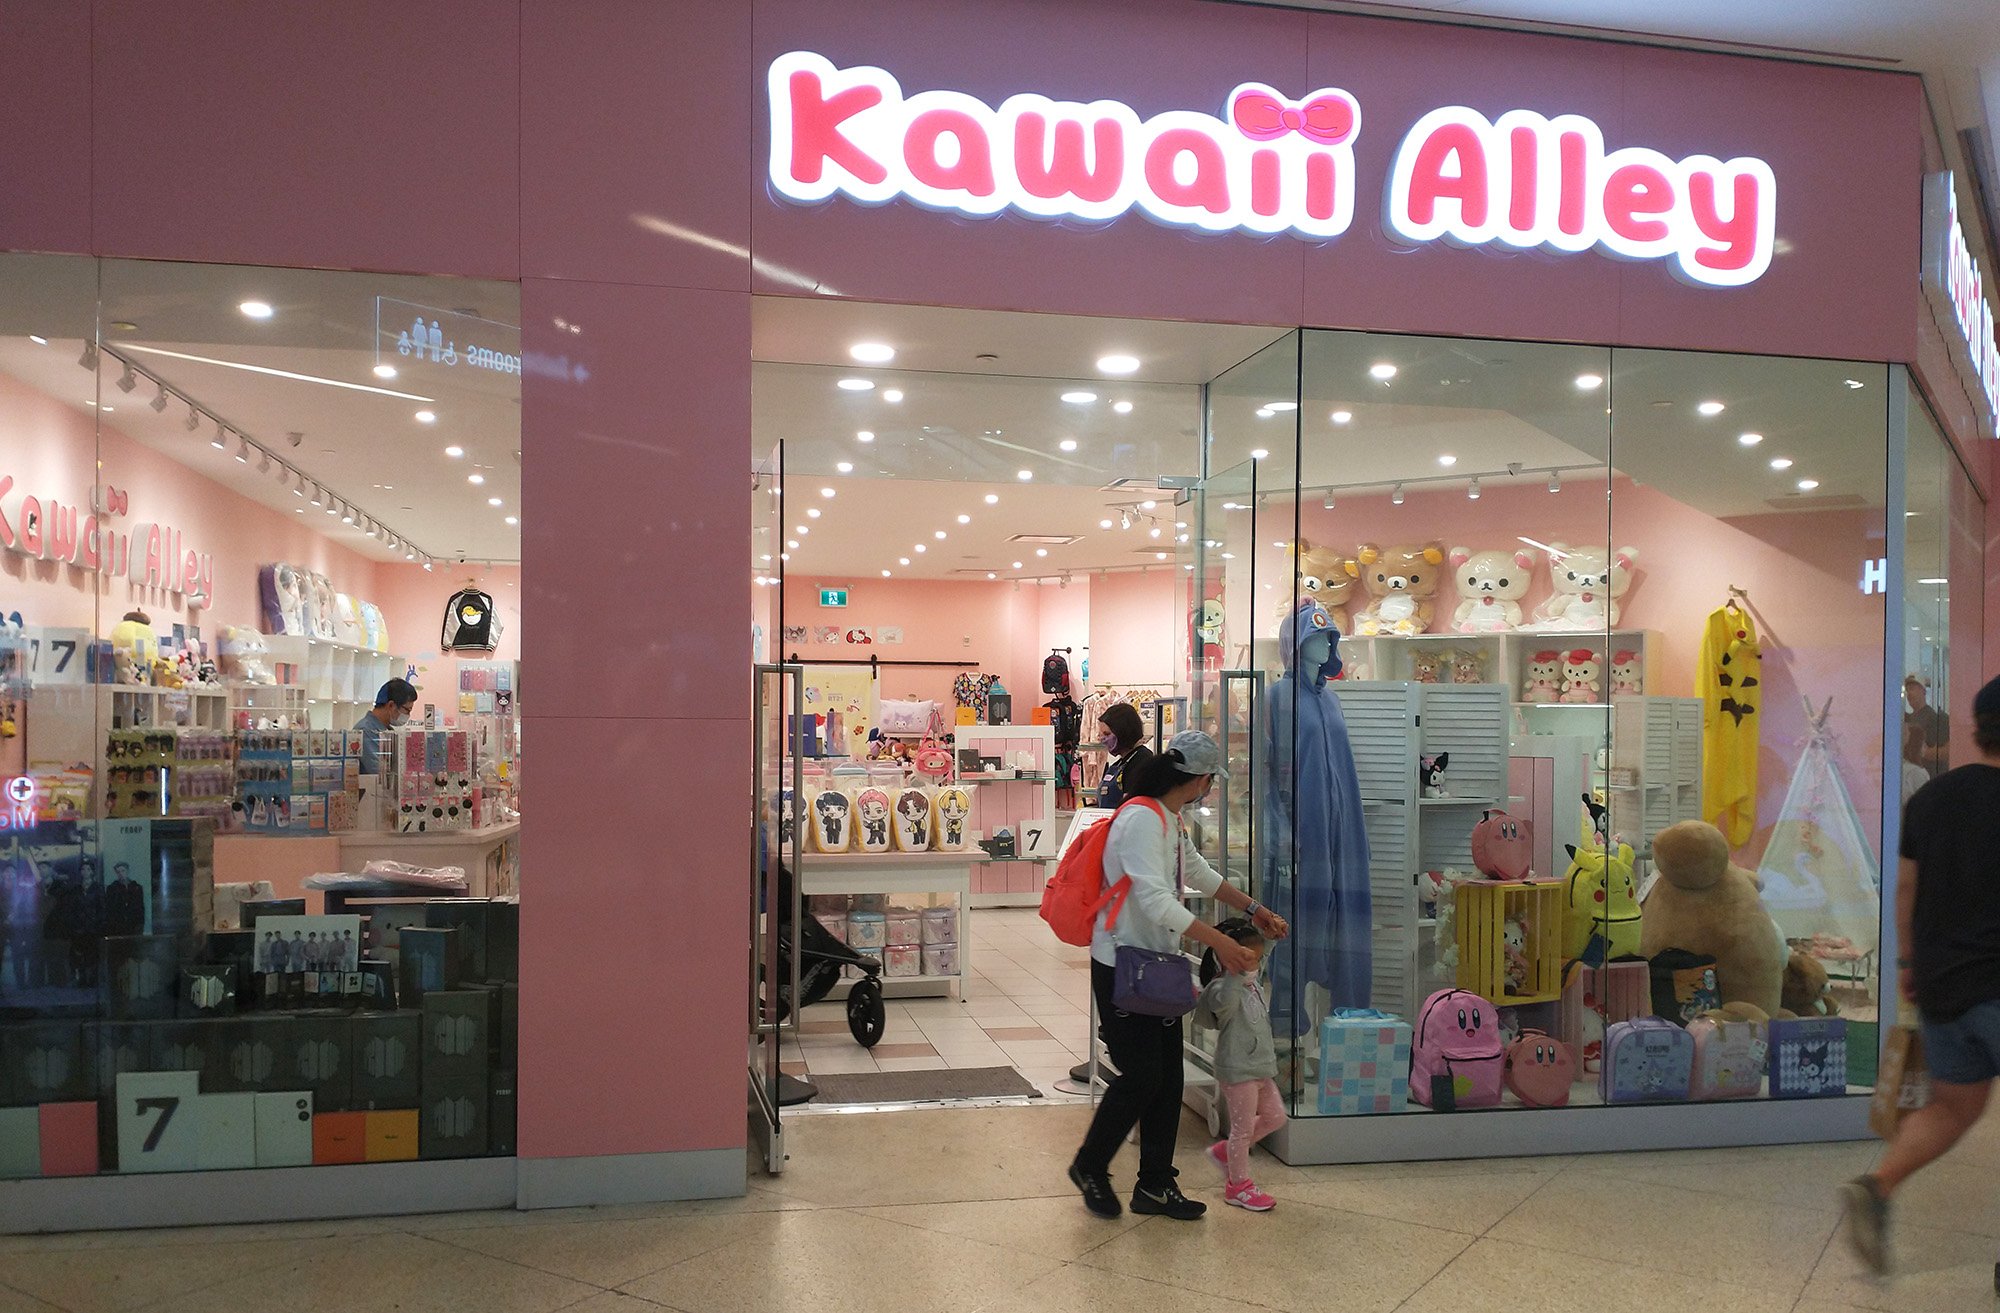 There's a few of these "cute Japanese things" stores in the mall.